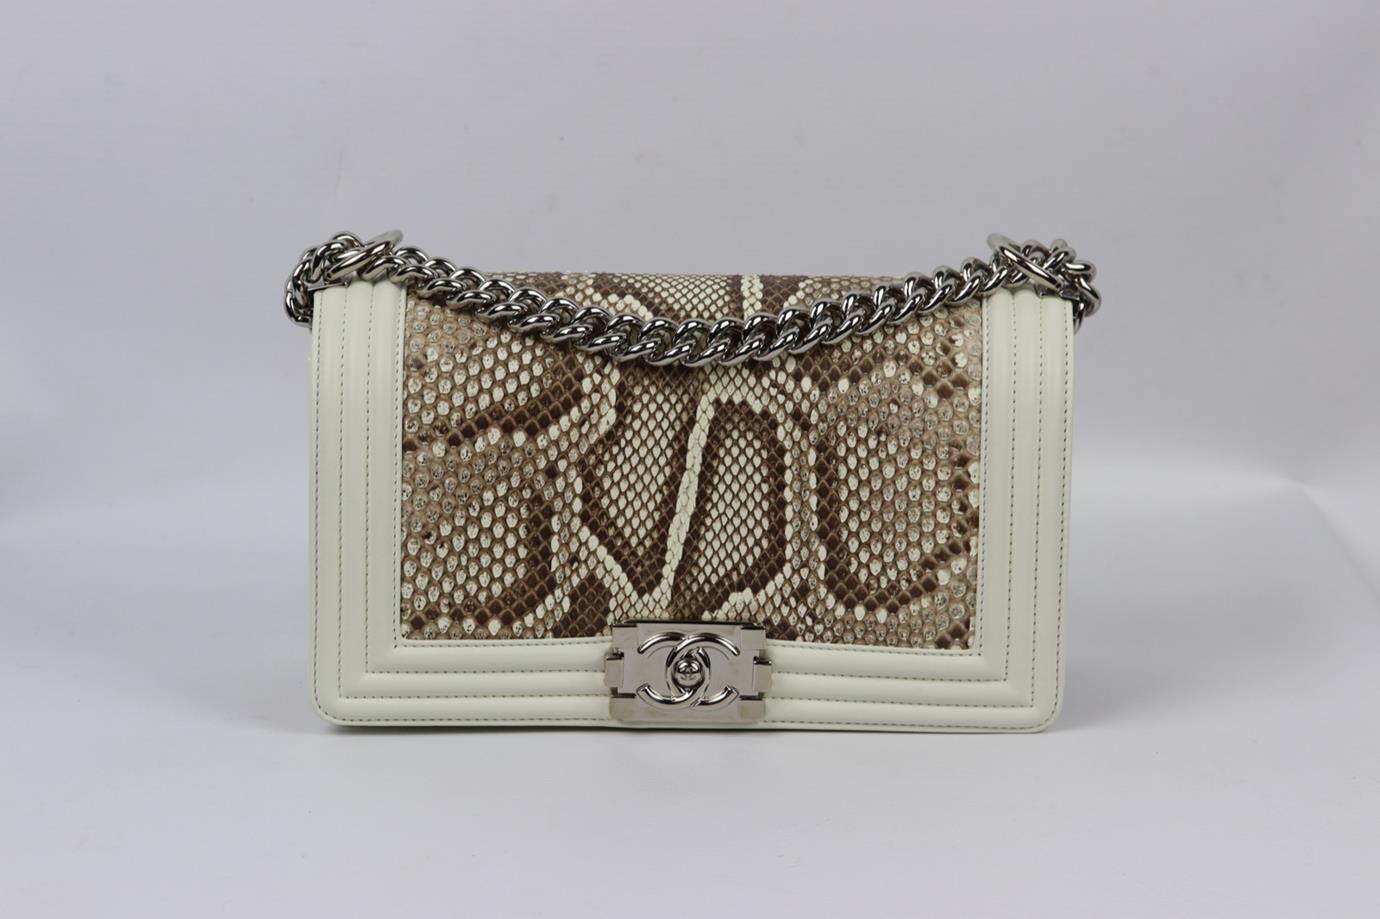 Chanel 2014 Boy Medium Python And Leather Shoulder Bag In Excellent Condition For Sale In London, GB